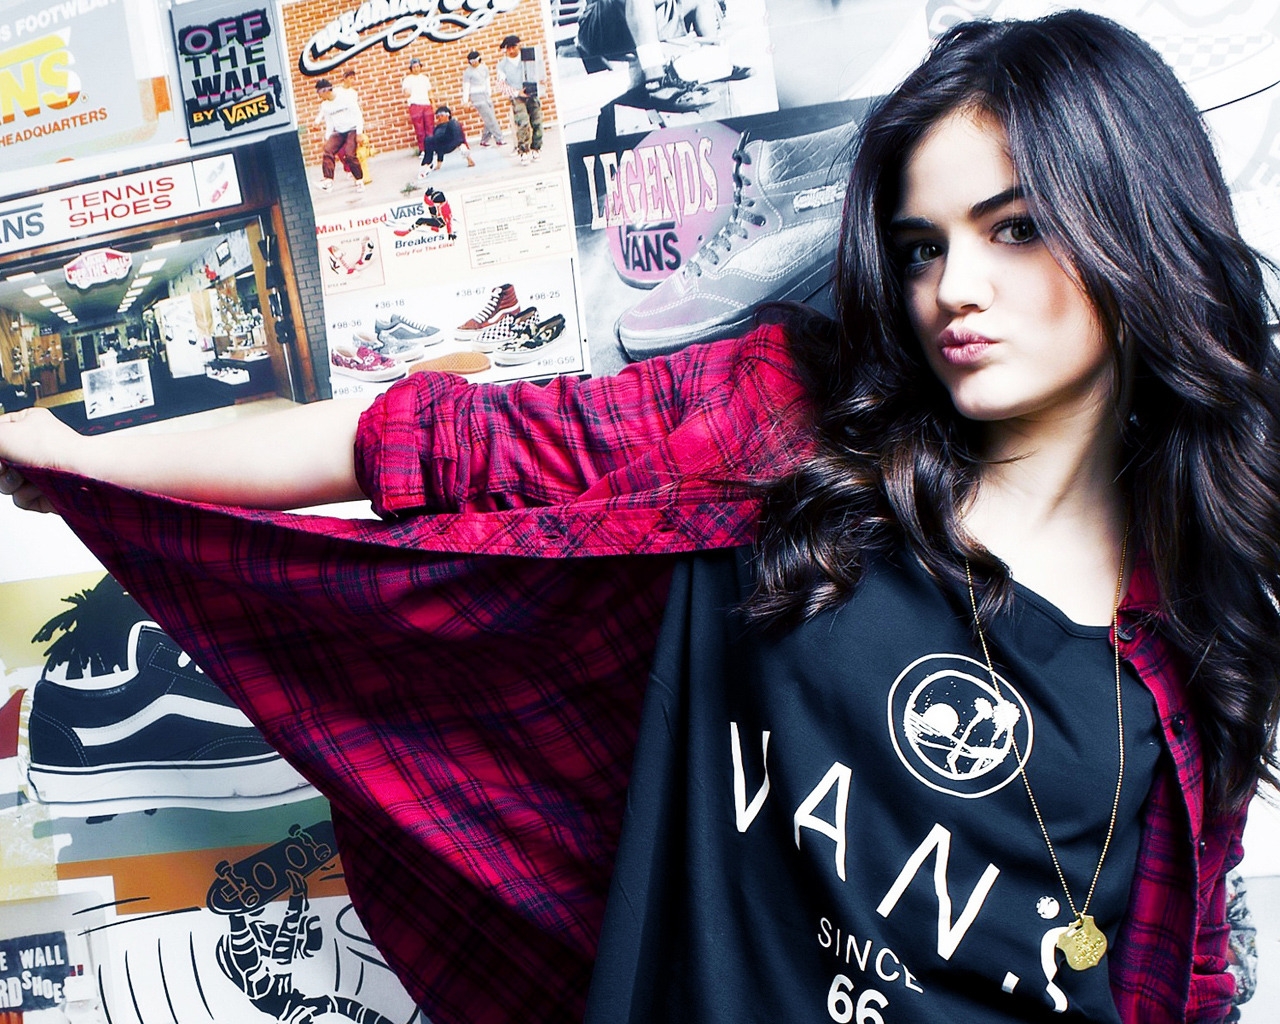 Lucy Hale for 1280 x 1024 resolution